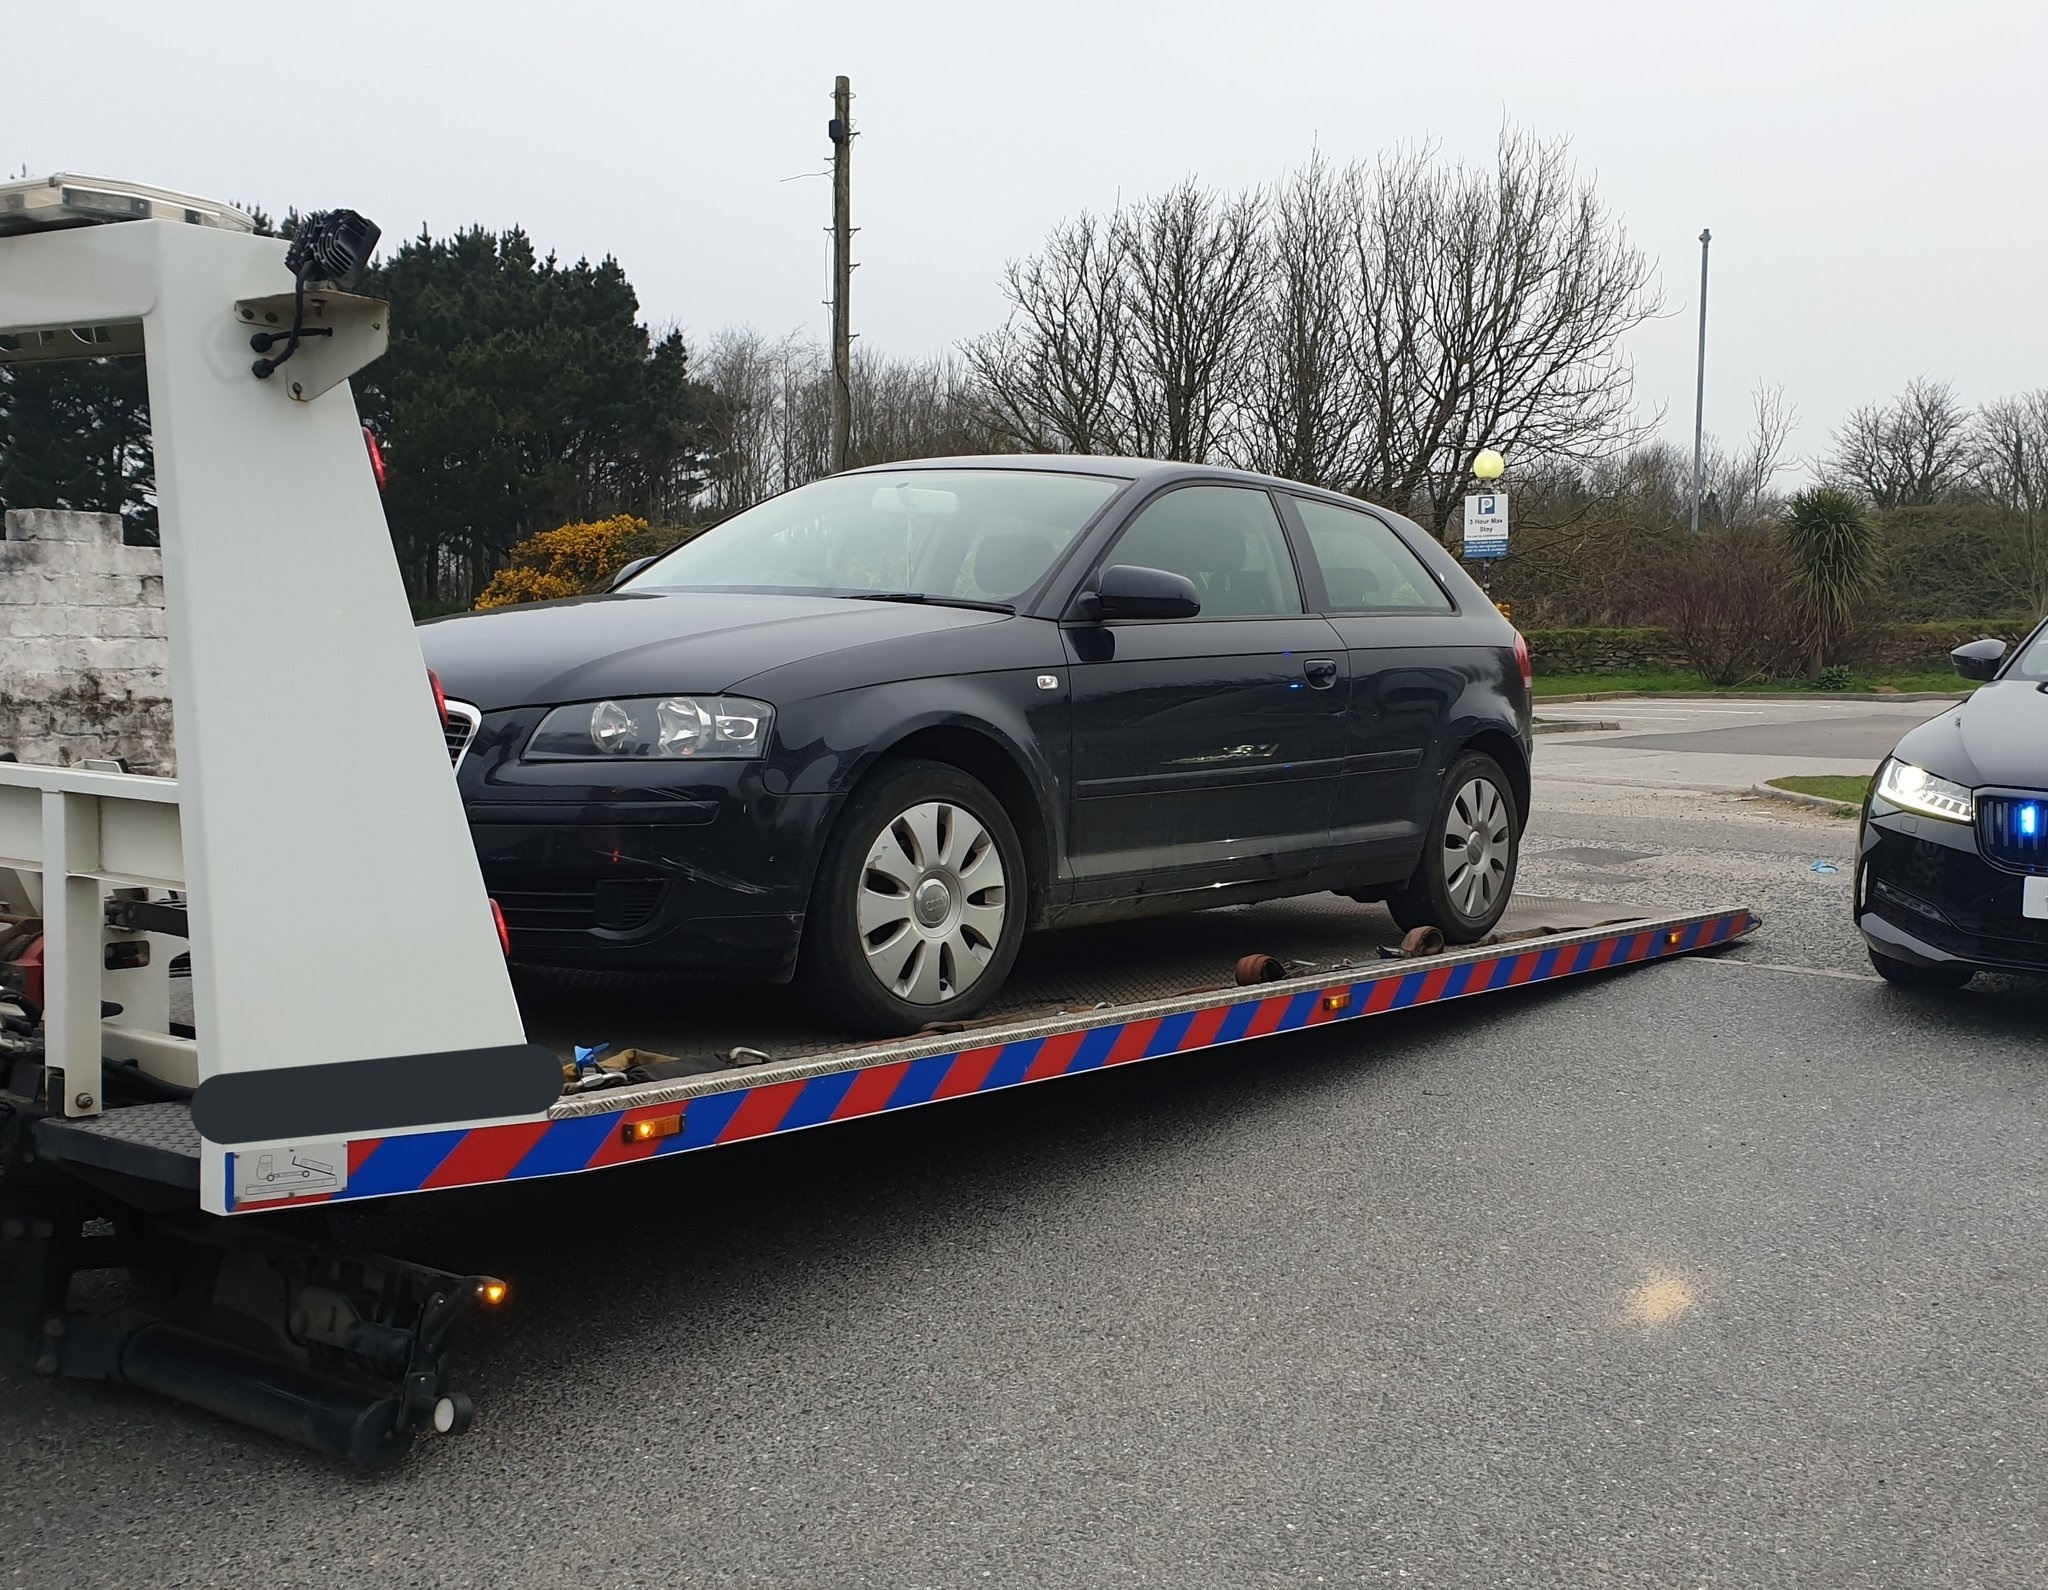 The car seized at Chiverton Cross Picture: Devon & Cornwall Police Roads Policing Team